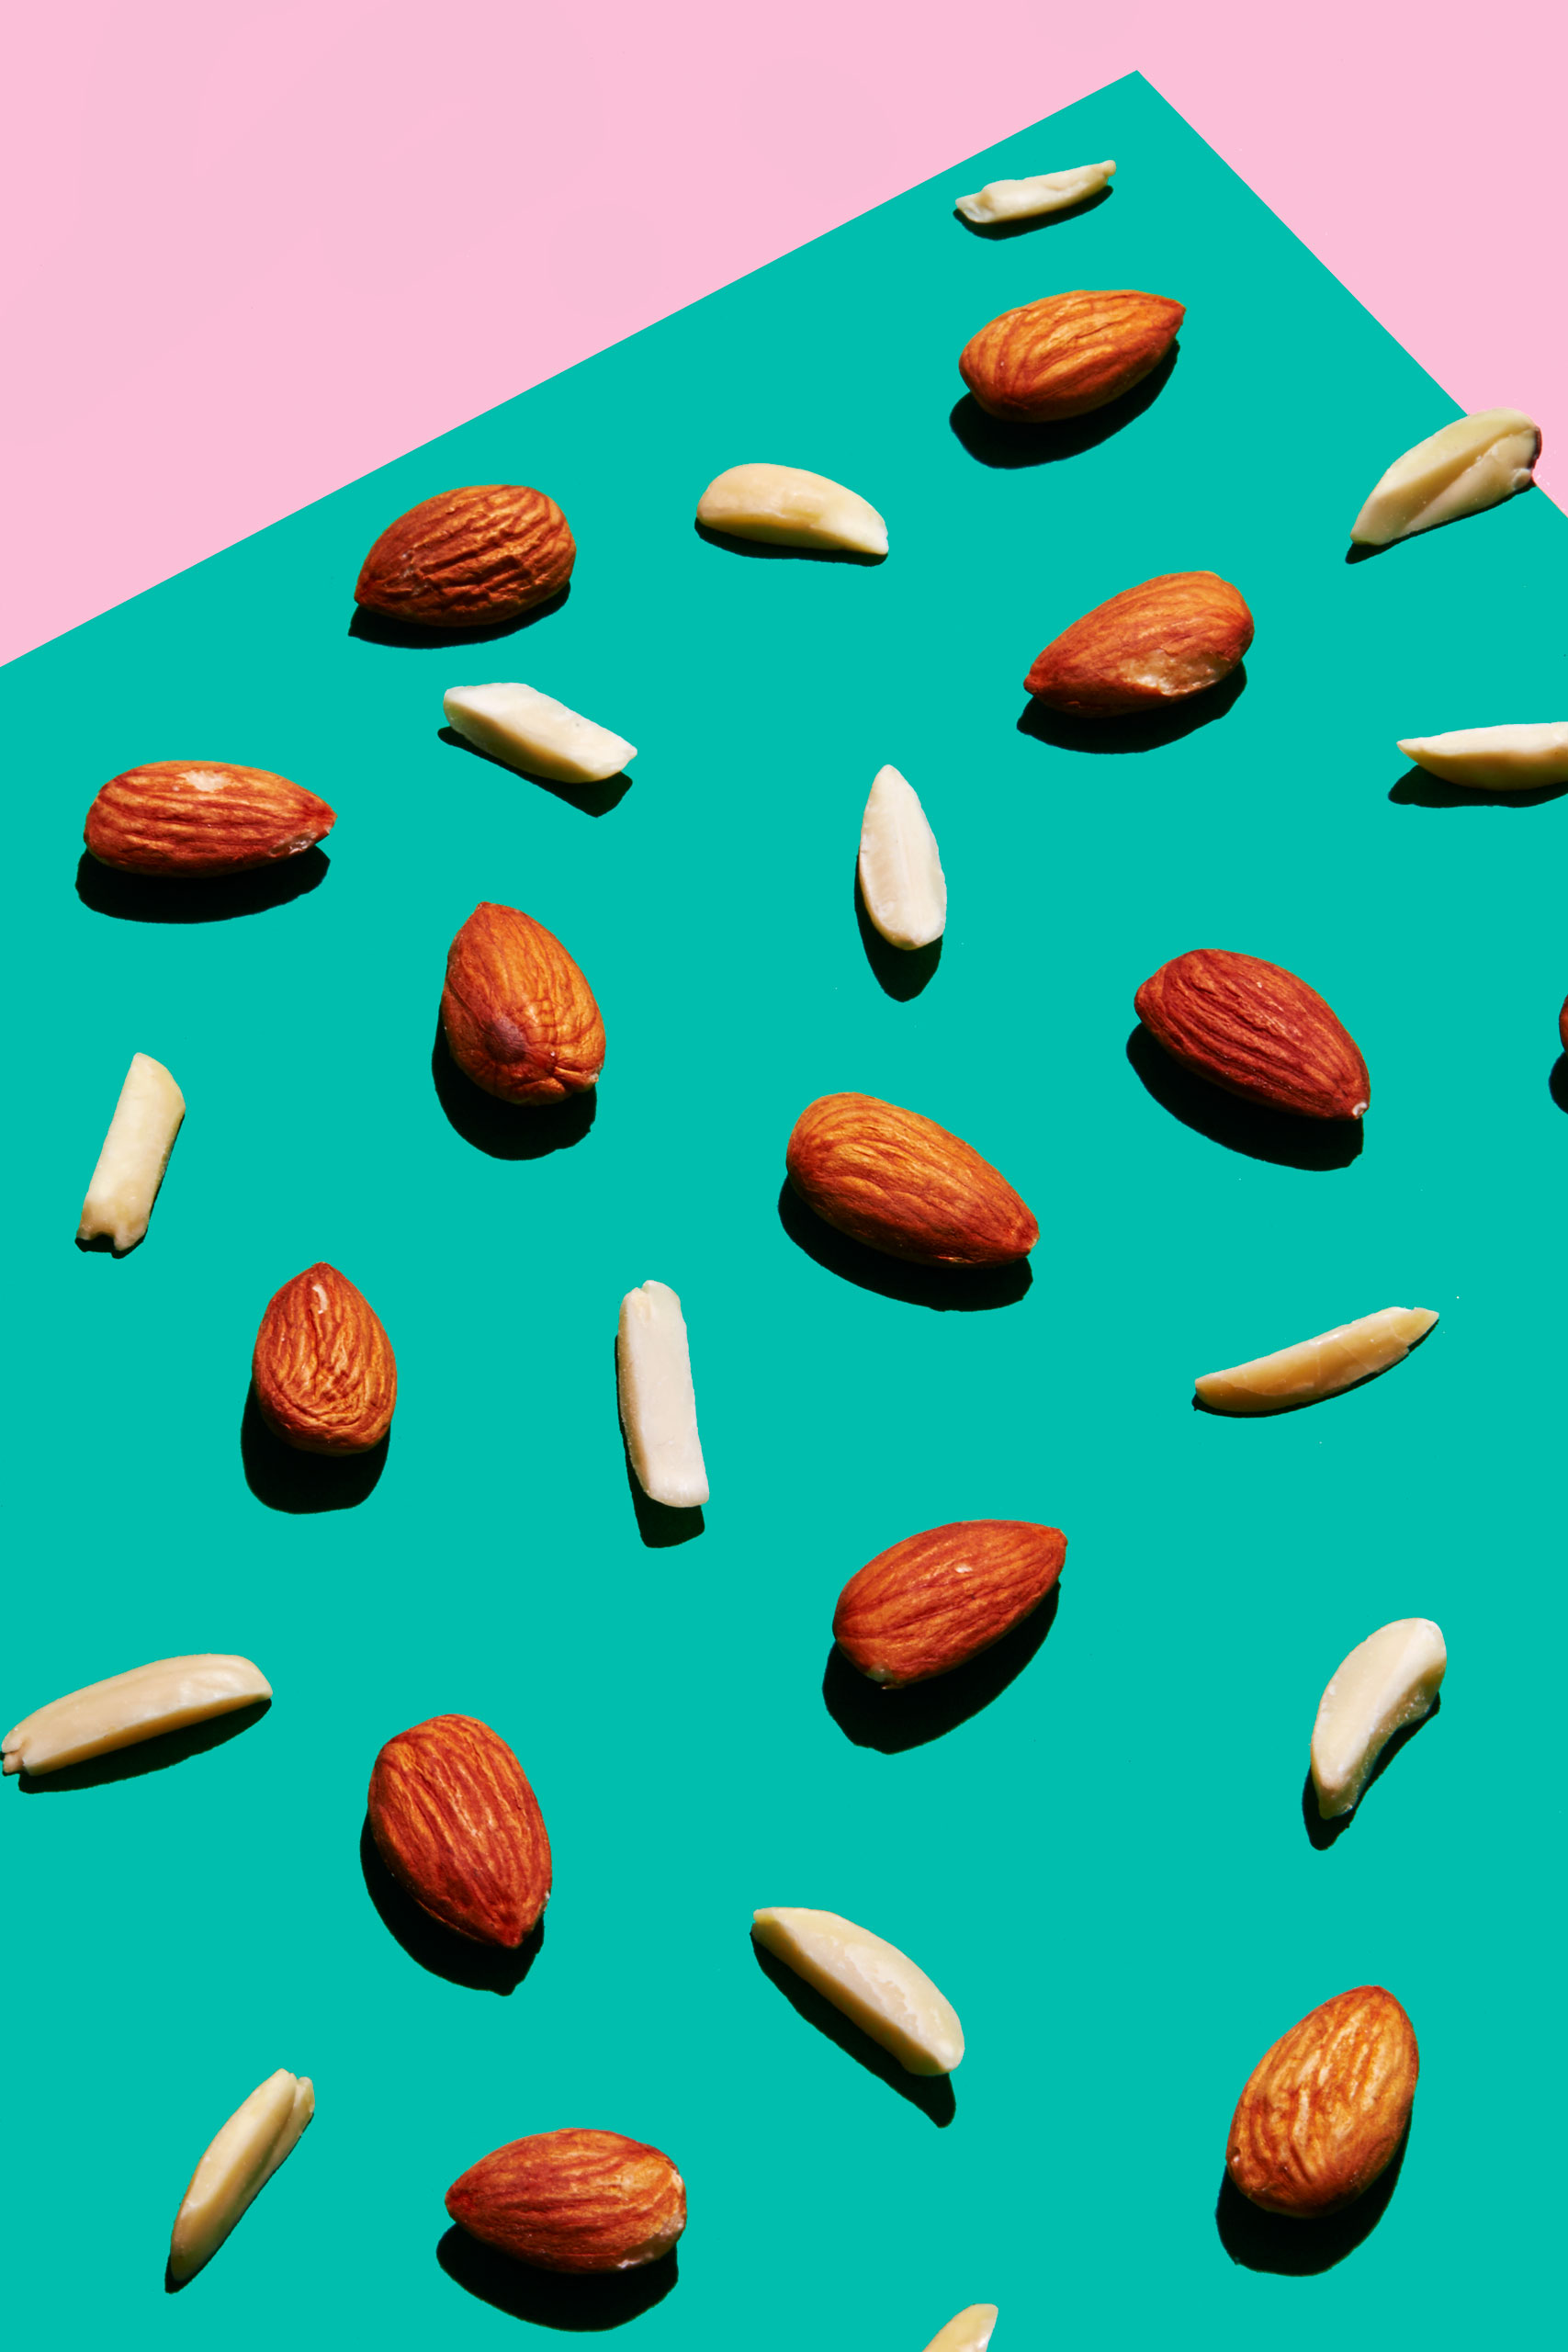 healthiest foods, health food, diet, nutrition, time.com stock, almonds, nuts